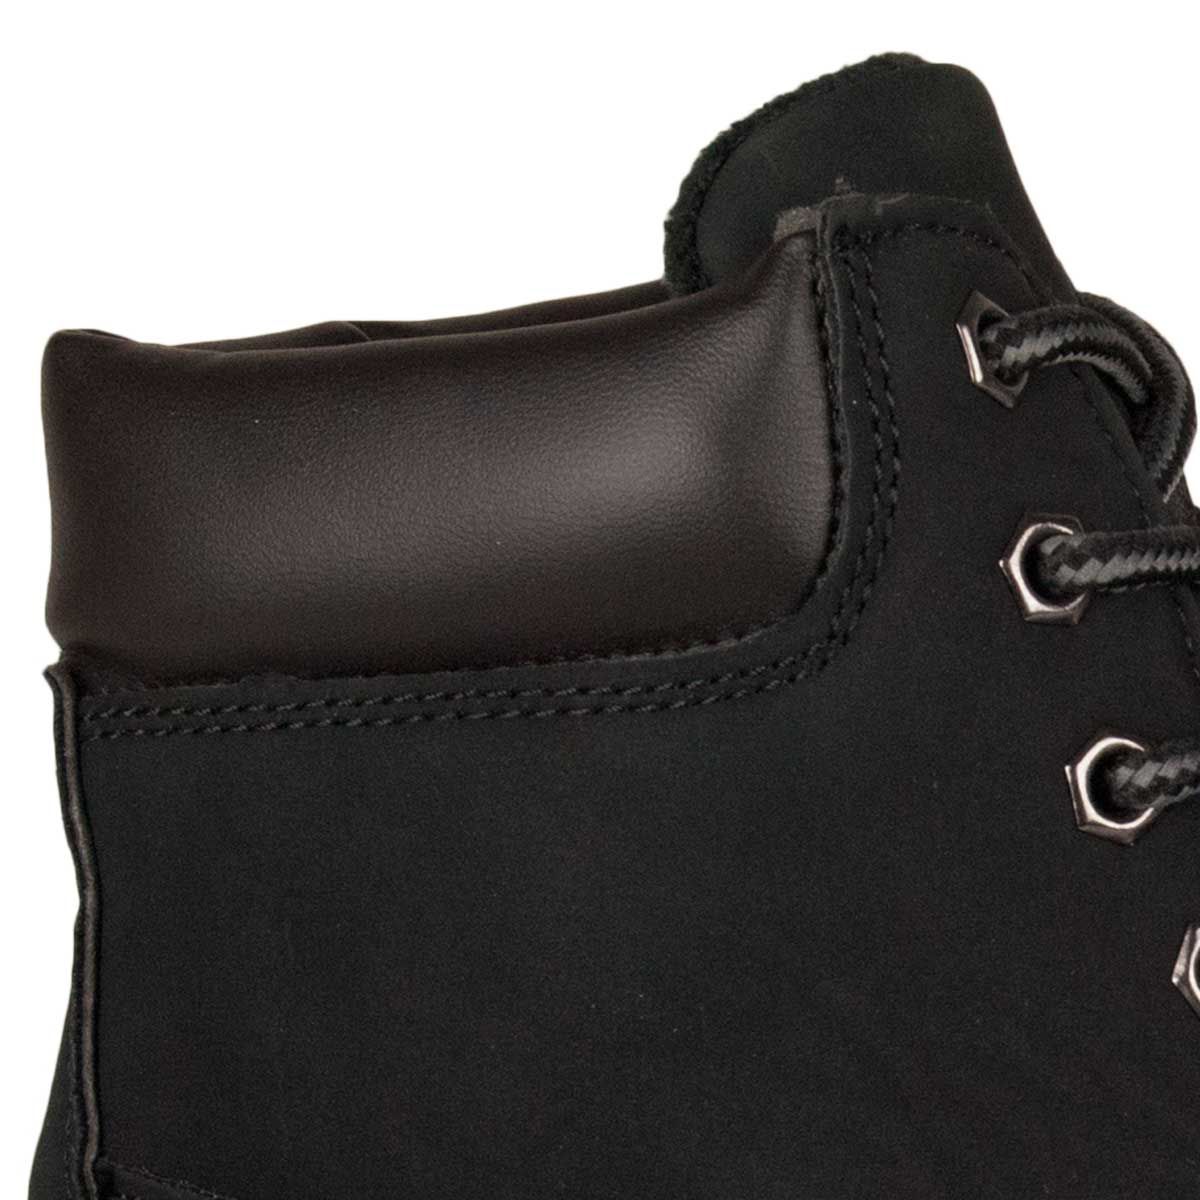 MAN mountain style boot. It highlights its soft tissue, with an ornament of padded material at the top of the cane. It has a bicolor cord cord and original star buttonholes in the form of a star, which give it a more informal touch. This boot is of extreme quality for its double seam. Previous and subsequent buttress, which give it greater firmness and consistency to the boot. Interior and plant lined with a soft hair. Comfortable and flexible moor. Foreign material Very easy to clean. Sole and anti-slip rubber platform, with tacos. This boot stands out for being very light. For your convenience and lightness, this boot is ideal to take your day to day.